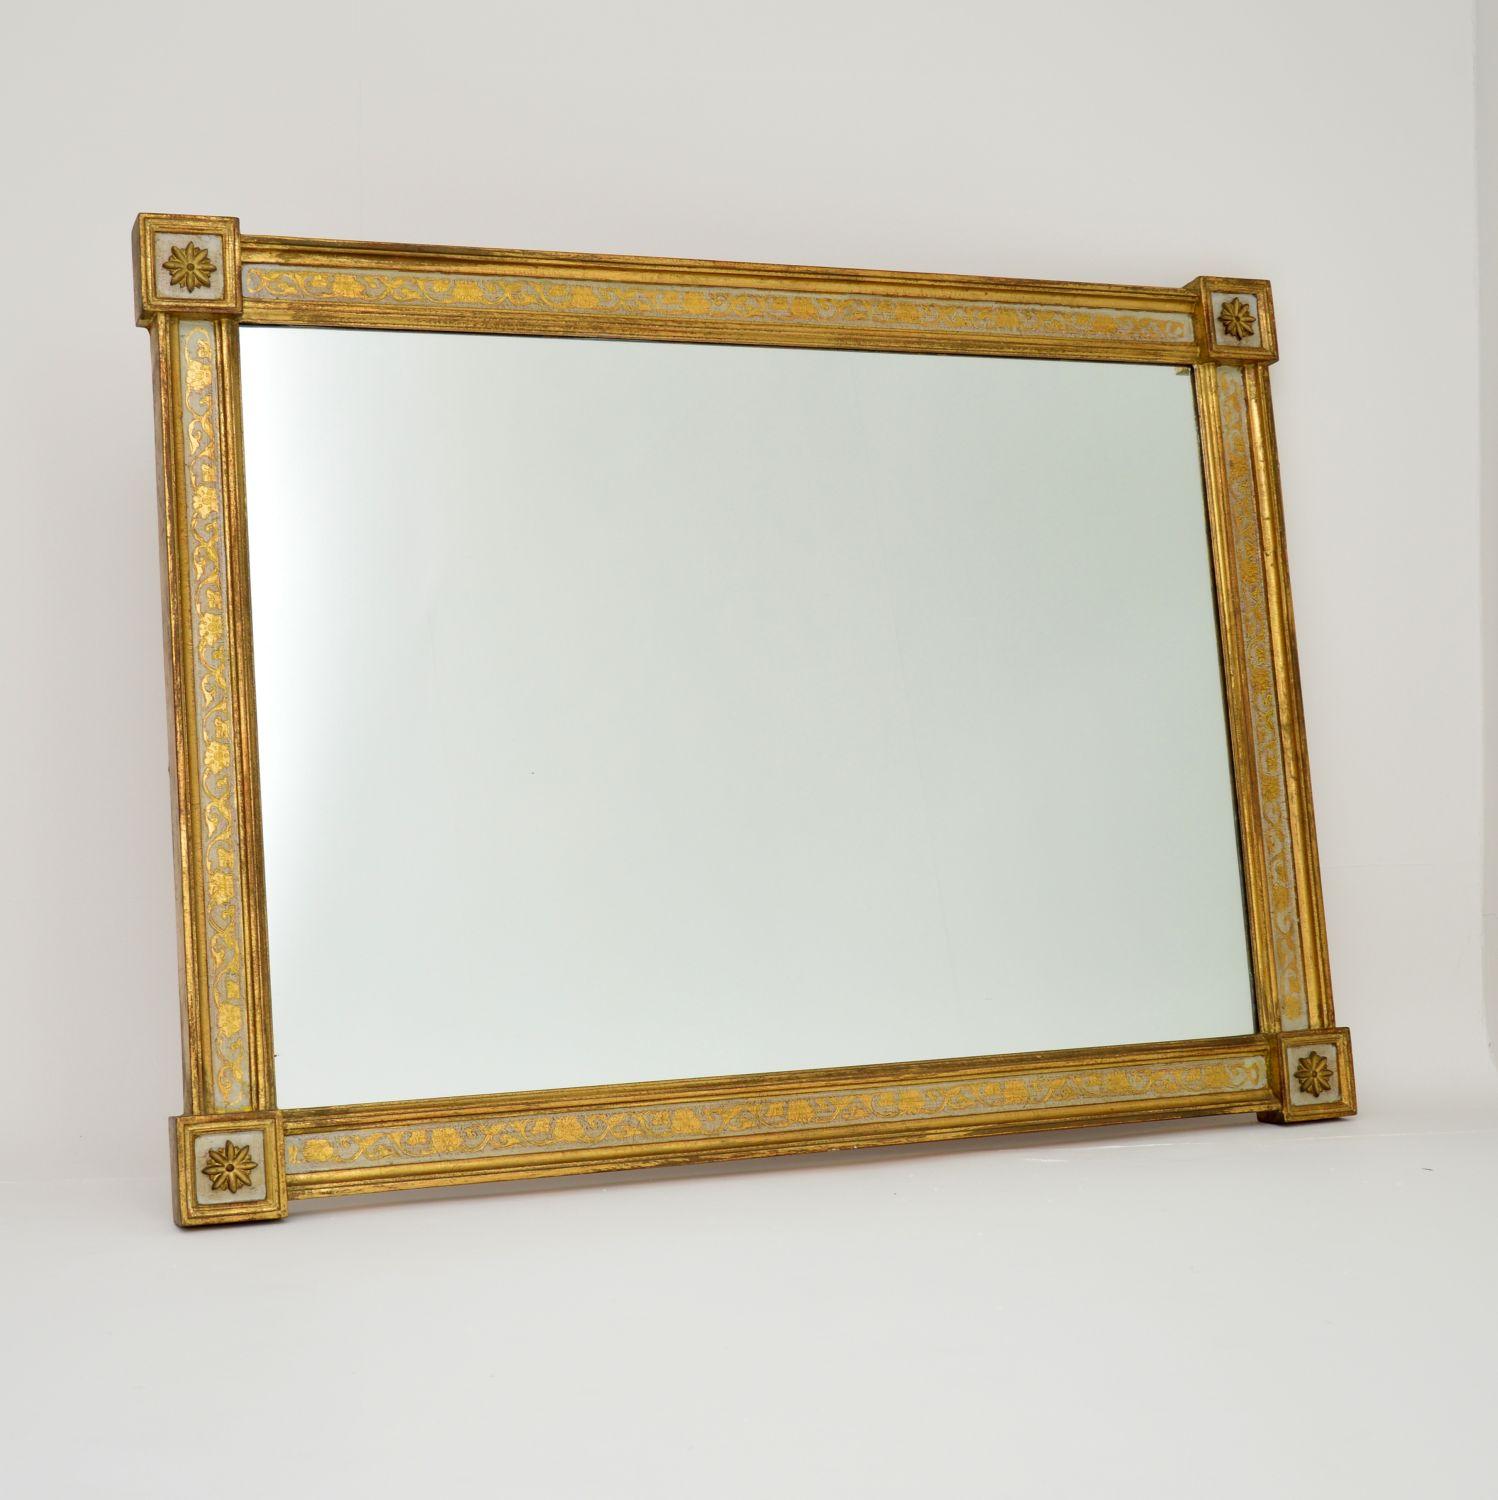 A stunning and impressive vintage Venetian gilt wood mirror. This was made in Italy, it dates from around the 1950’s period.

It is of excellent quality and is very large, check the measurements as it is hard to grasp the scale in the